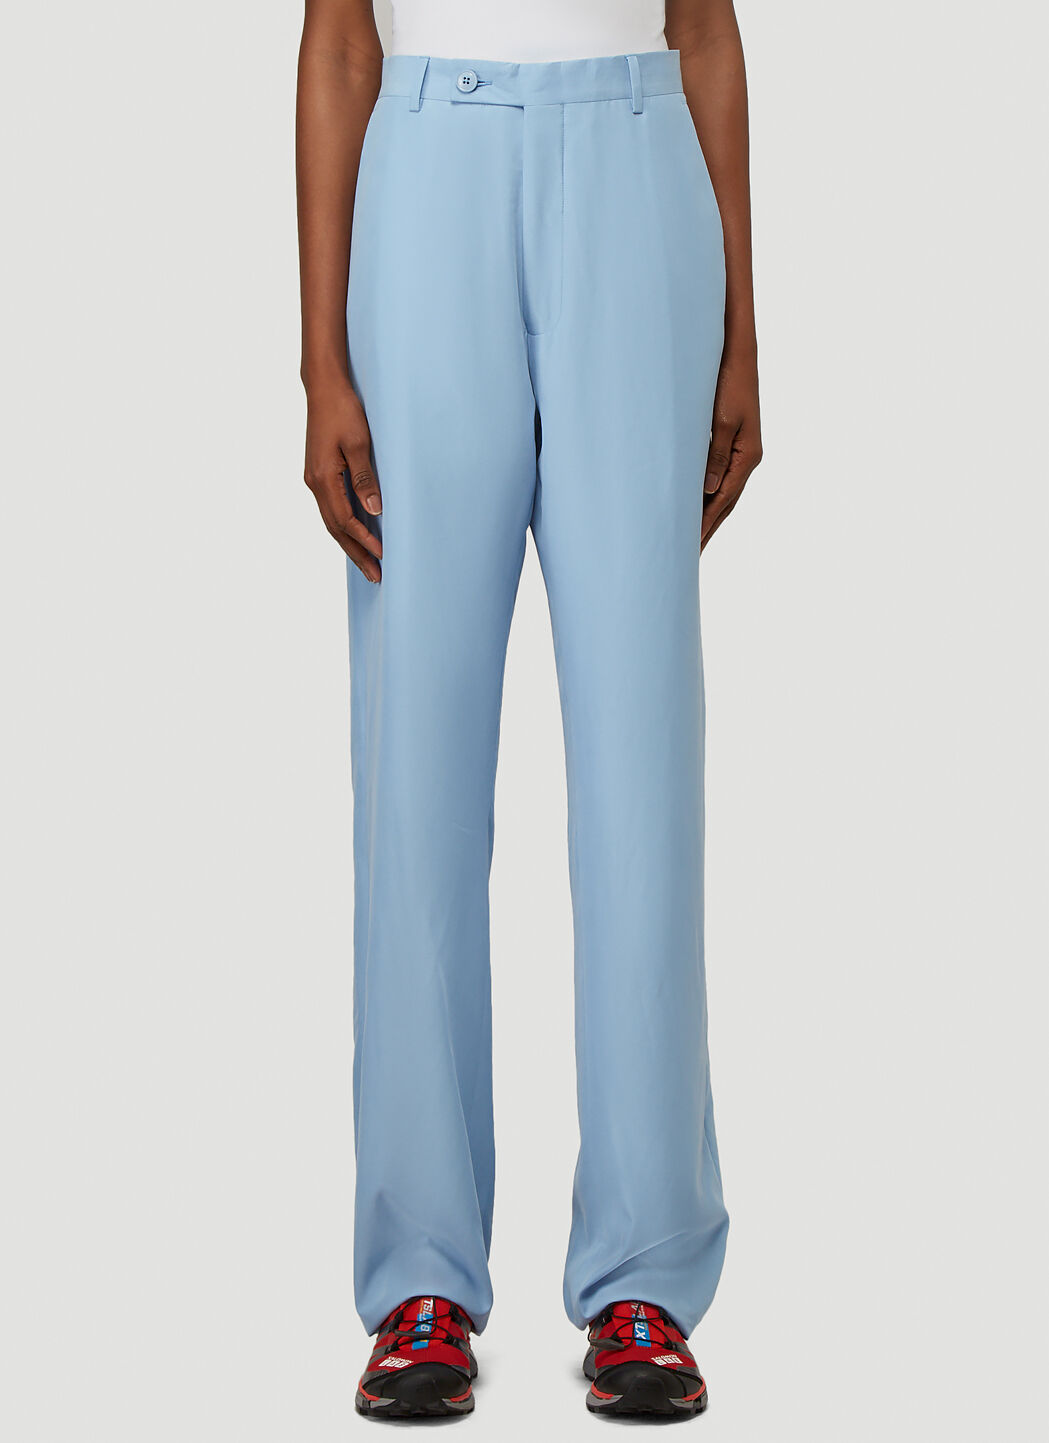 Martine Rose Tailored Pants Blue mtr0240002